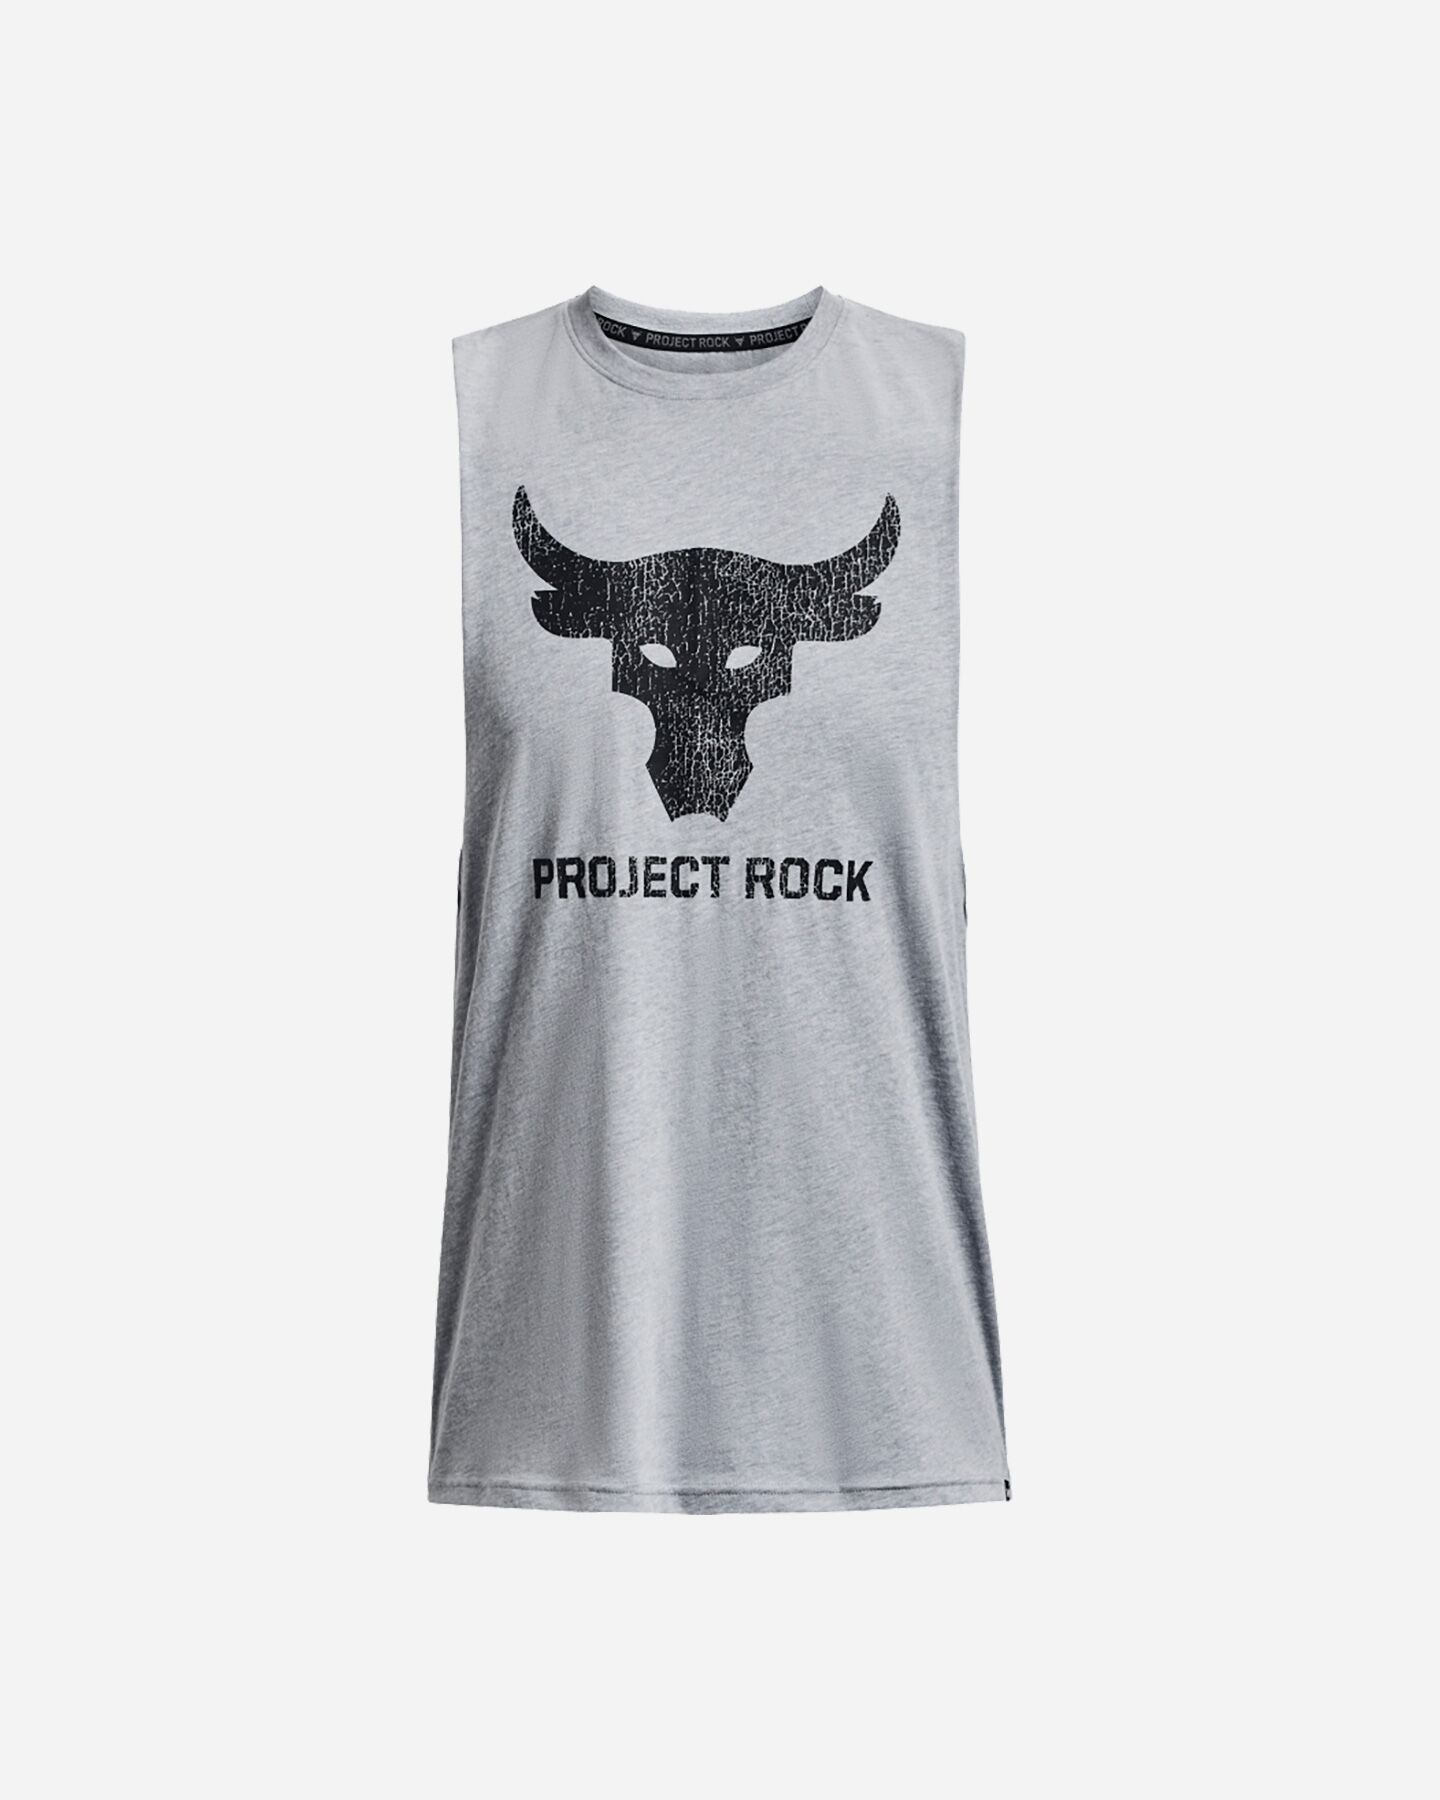  Canotta UNDER ARMOUR THE ROCK BRAHMA BULL M S5528229|0035|XS scatto 0